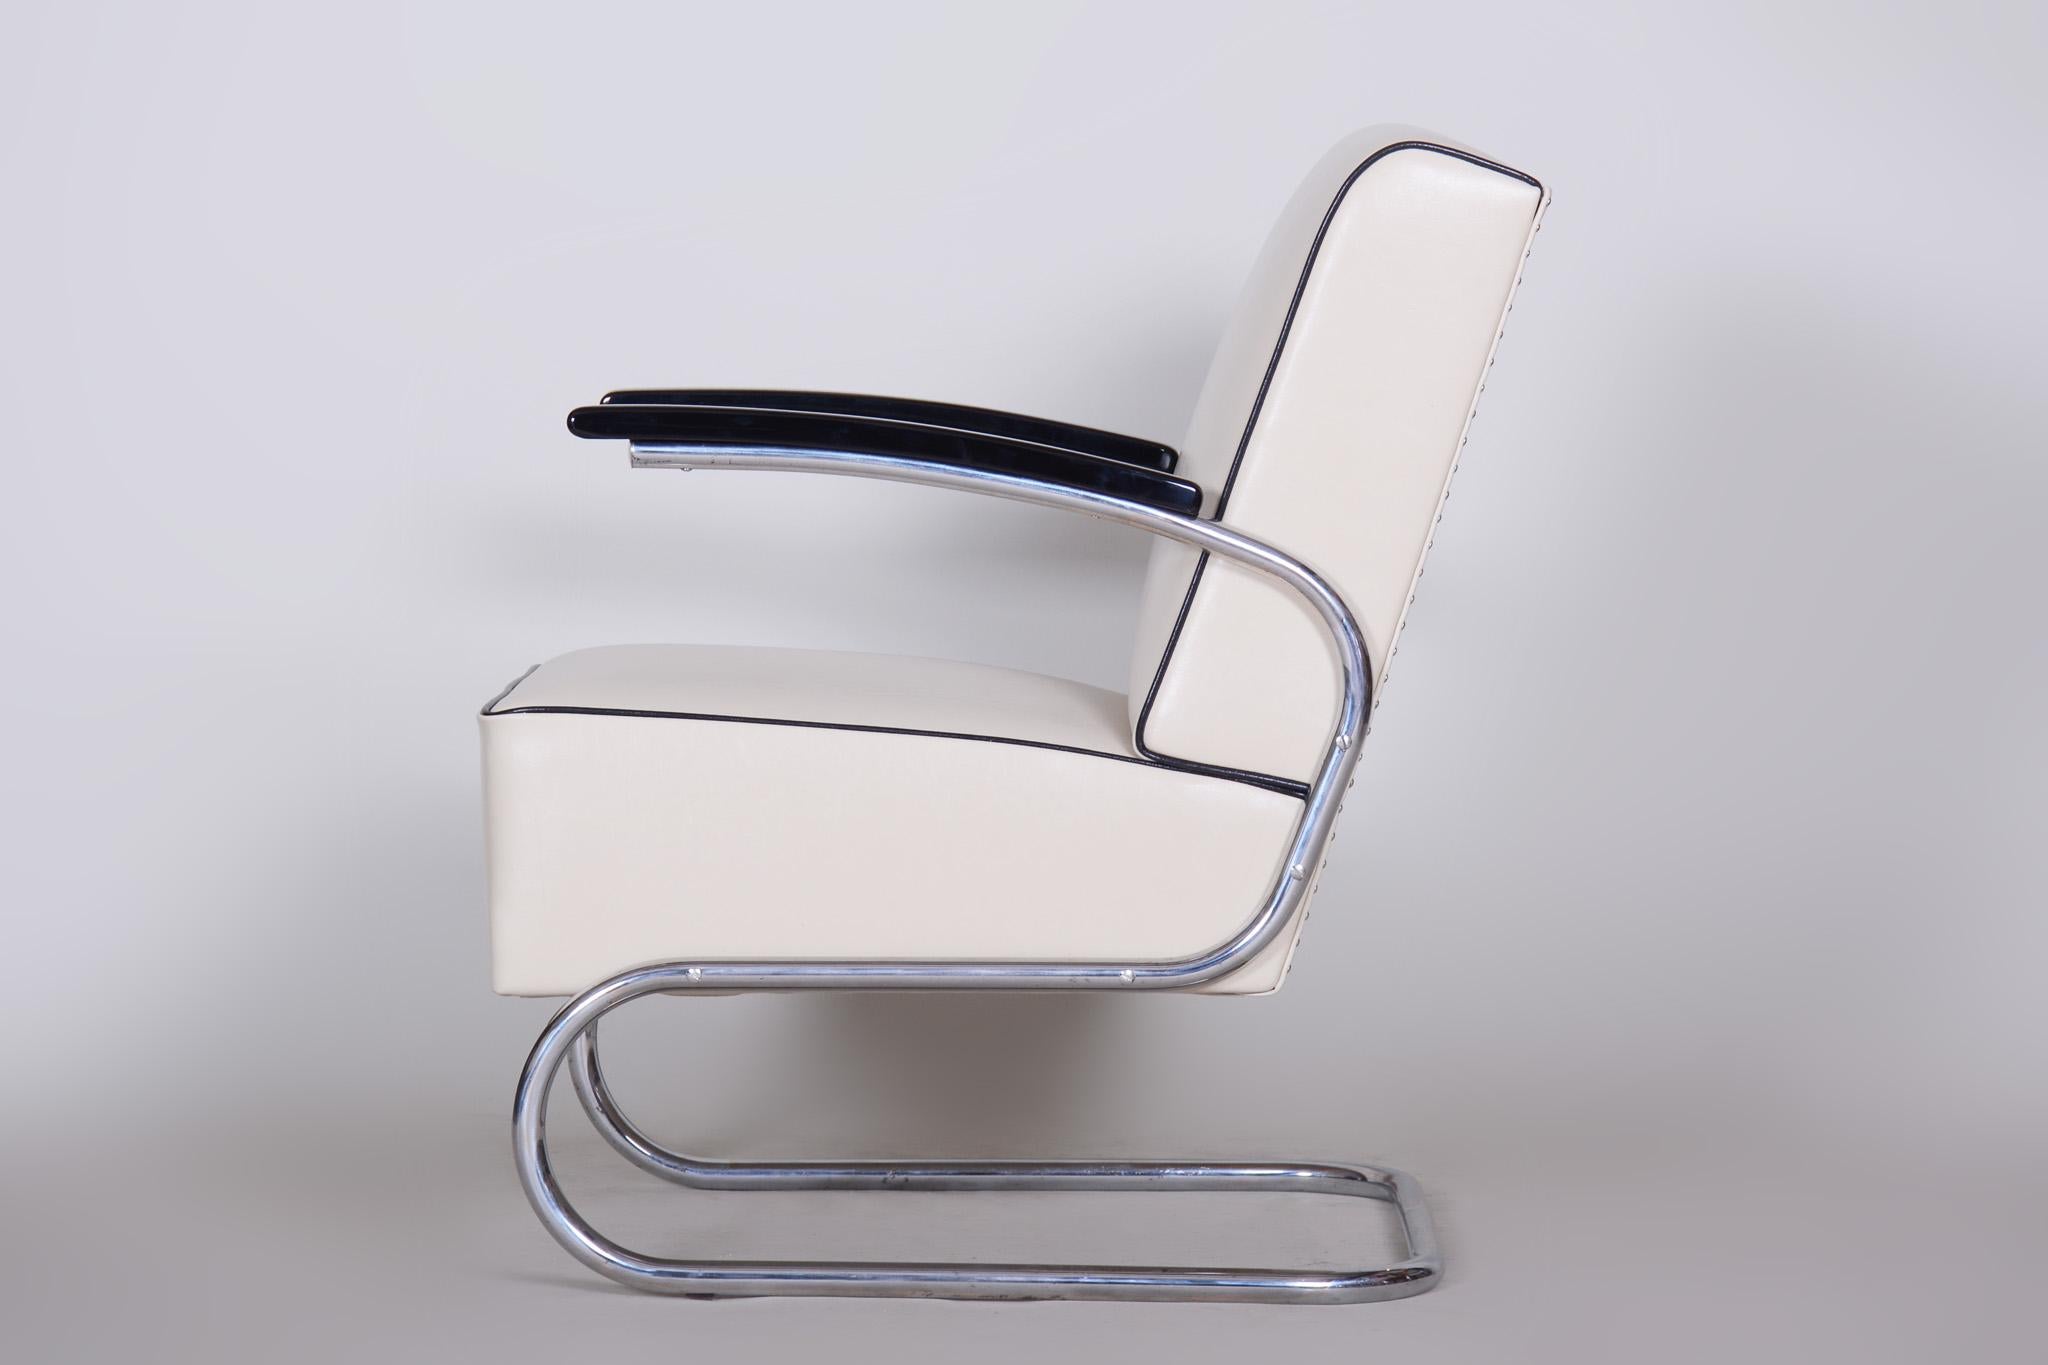 Tubular Steel Cantilever Armchair in Art Deco, Chrome, New Ivory Leather, 1930s In Good Condition For Sale In Horomerice, CZ